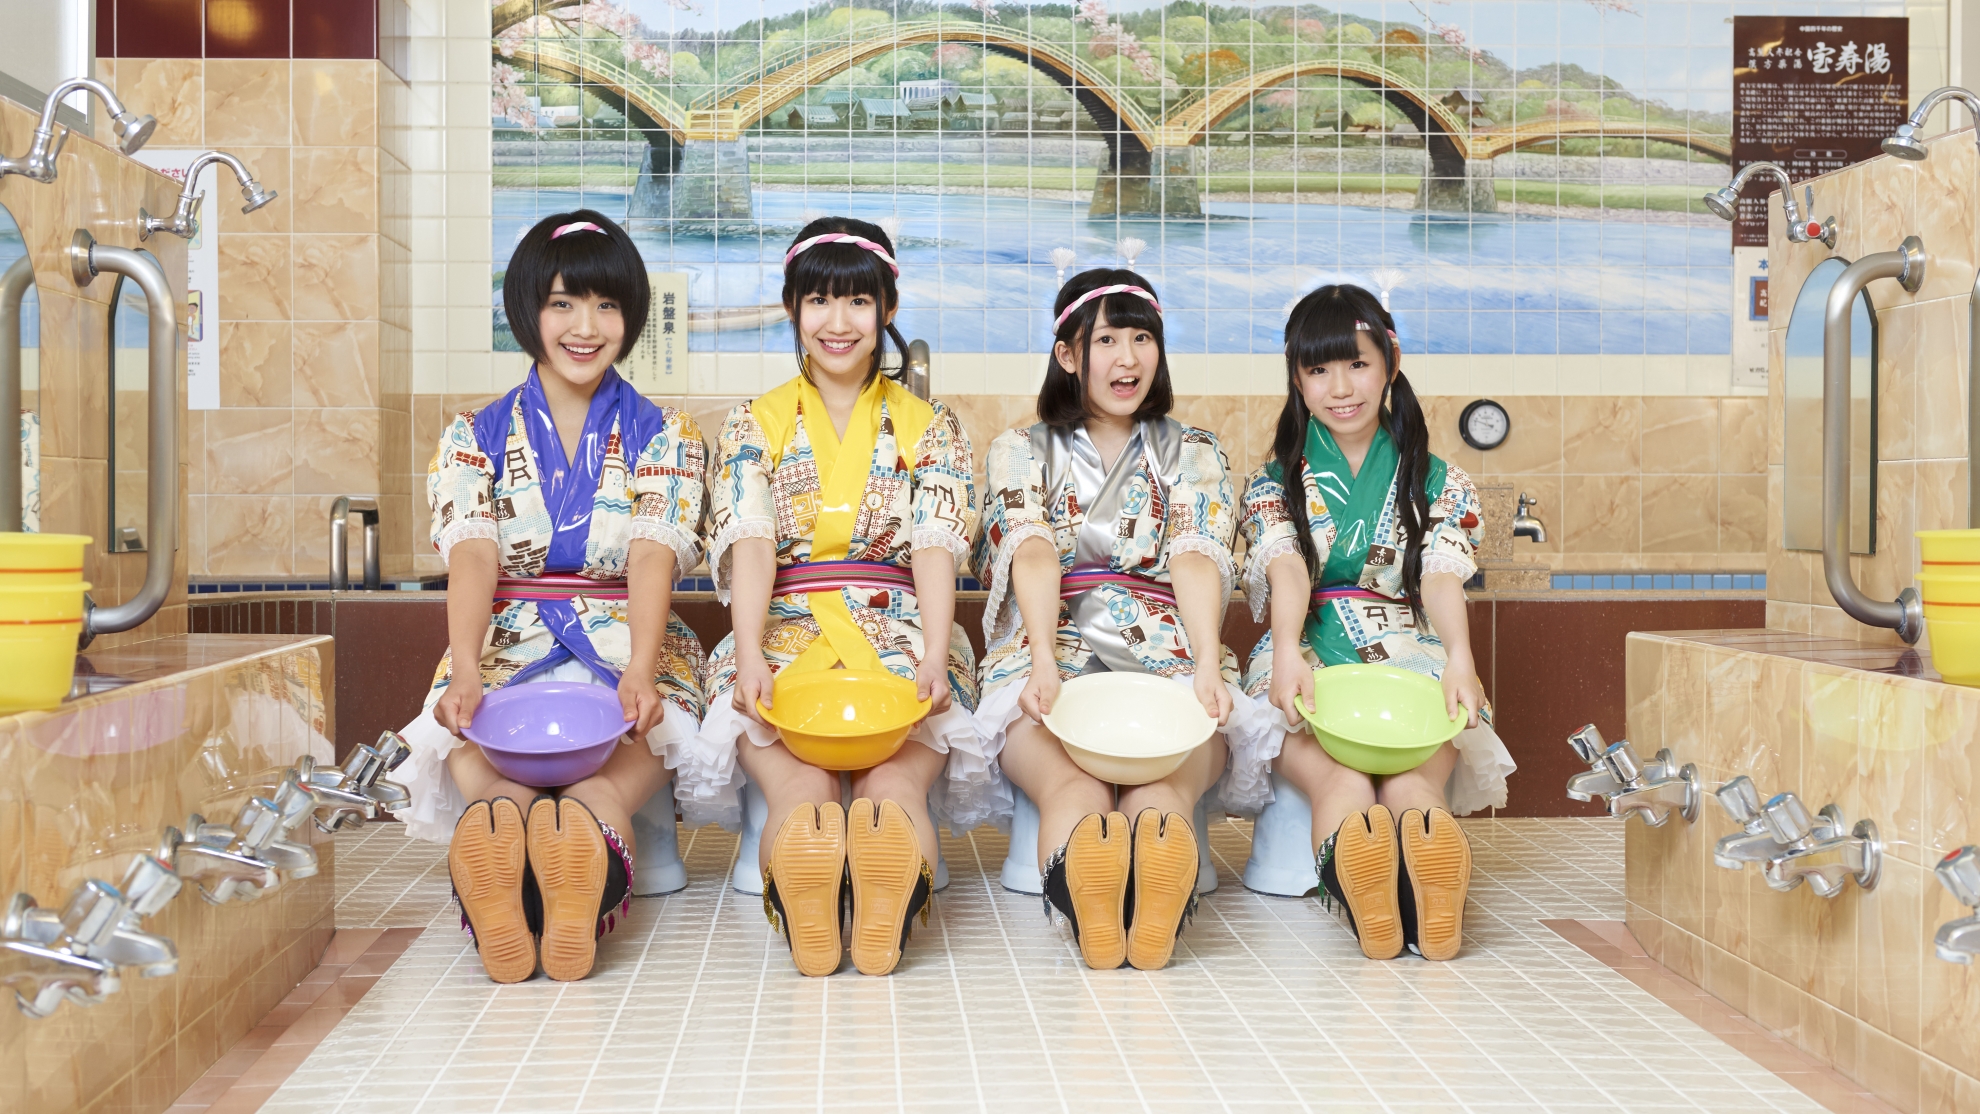 GRAZIE3 Becomes Sento Girls?  360° Music Video for “Oyu Oyu Ofuro” Has Been Released!